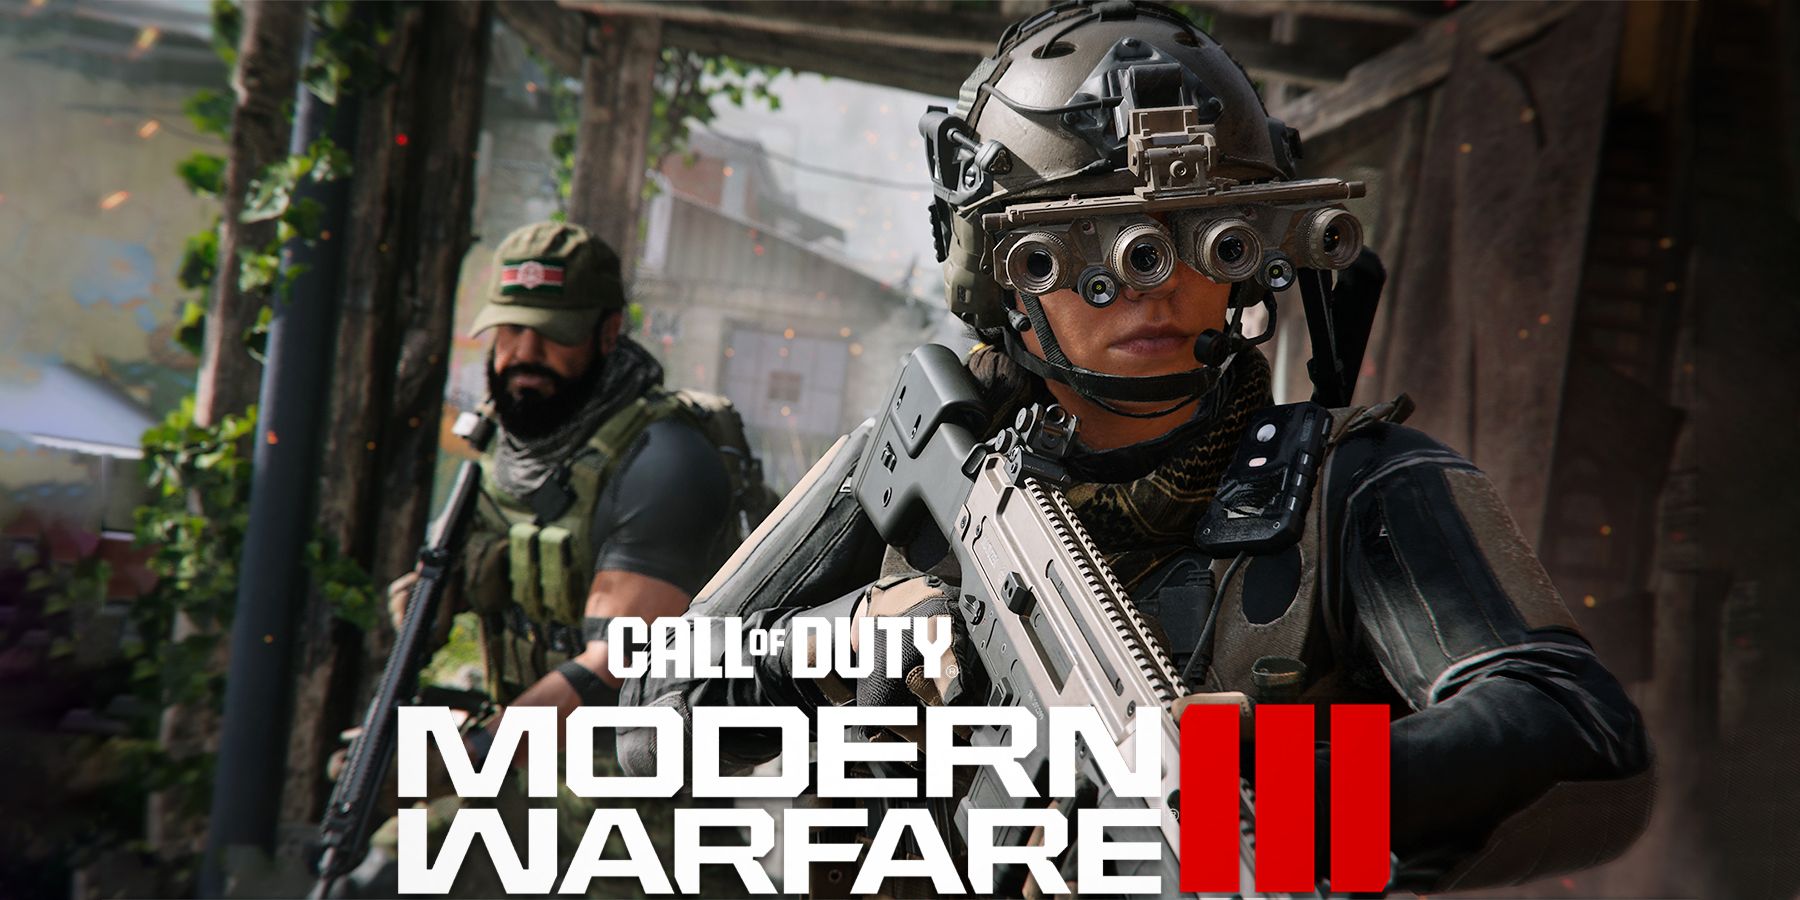 Call of Duty Modern Warfare 3 single player review - was it rushed?